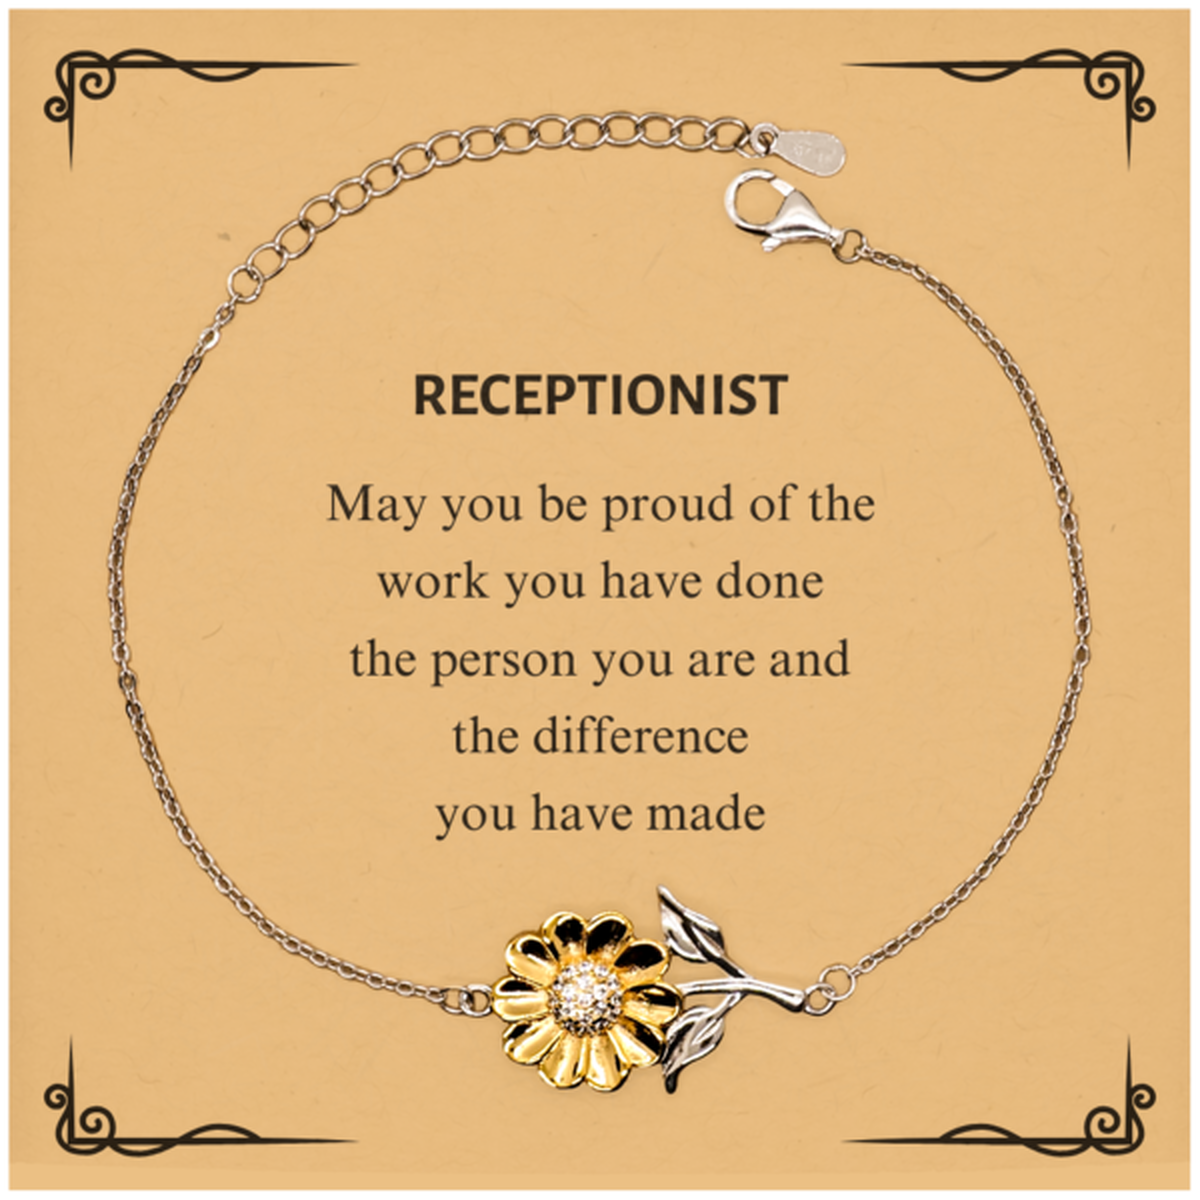 Receptionist May you be proud of the work you have done, Retirement Receptionist Sunflower Bracelet for Colleague Appreciation Gifts Amazing for Receptionist